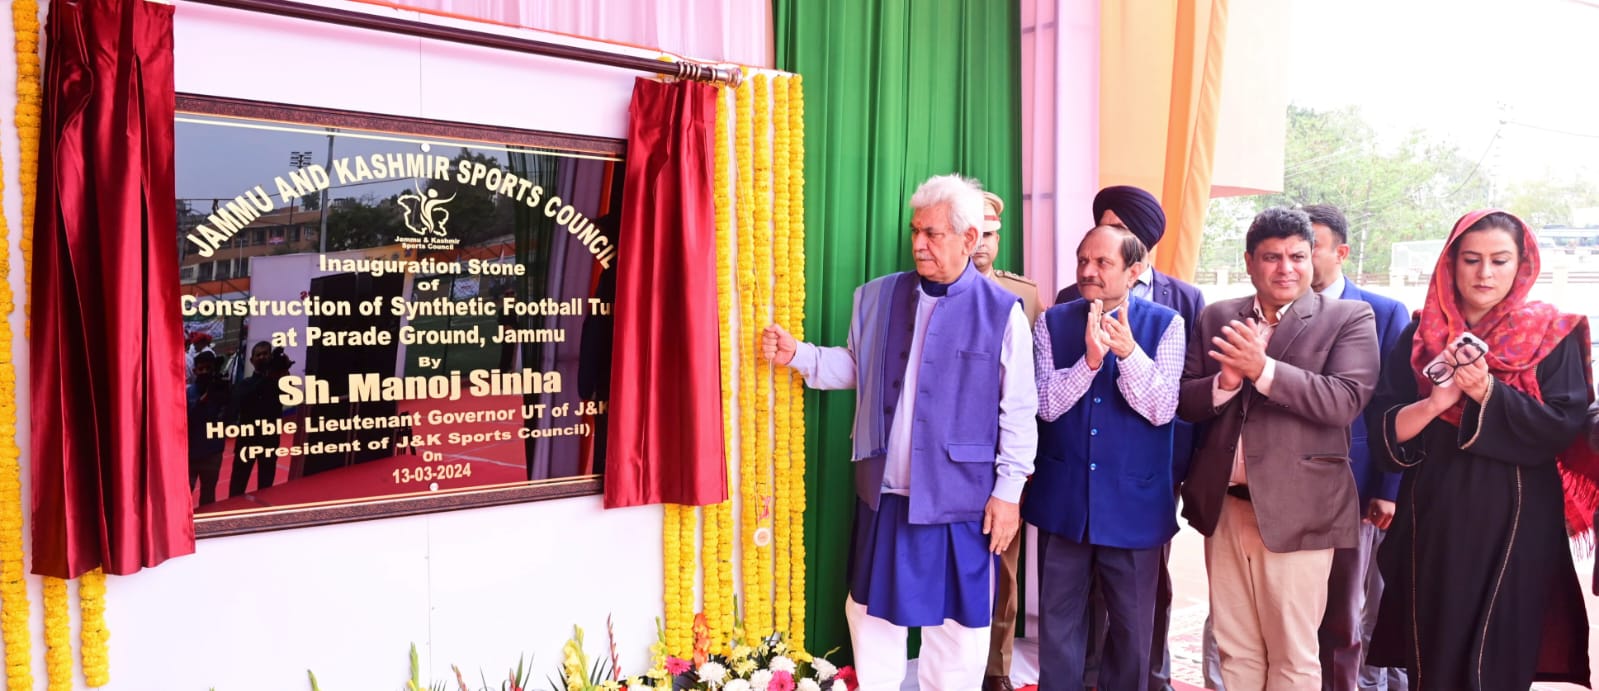 LG J&K inaugurates State-of-the-Art Synthetic Football Turf at Parade Ground in Jammu